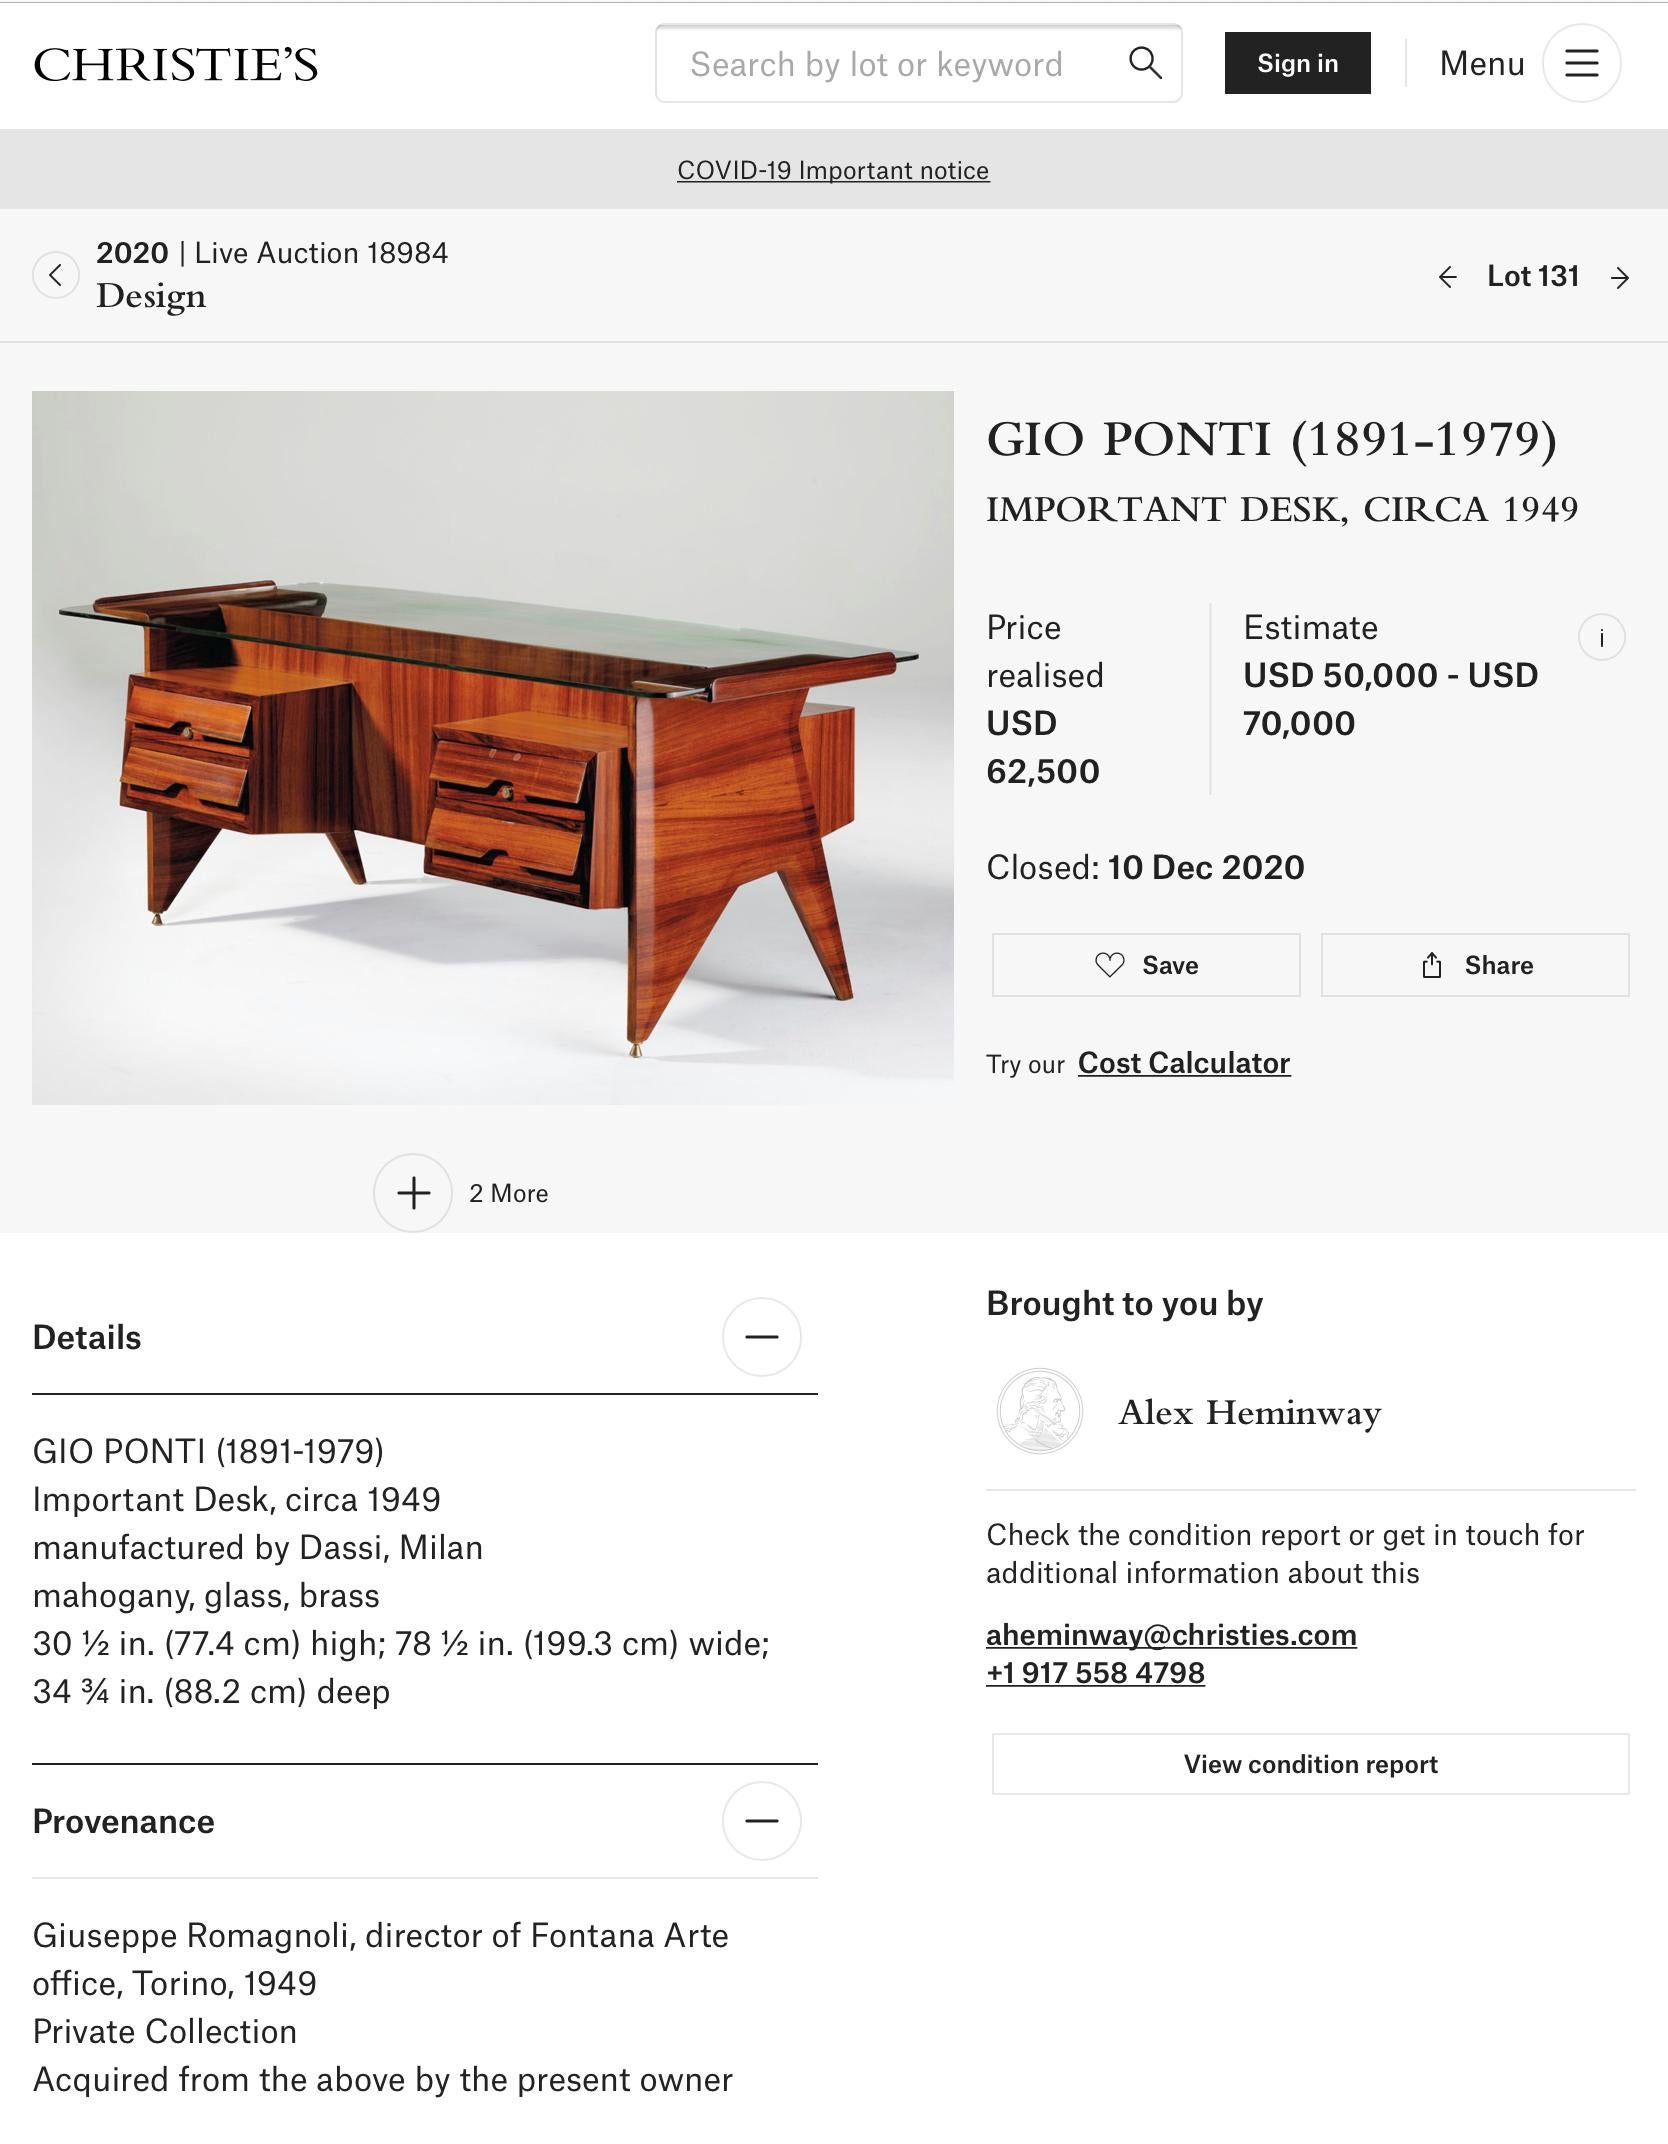 Important Desk by Gio Ponti for the offices of Fontana Arte. 2